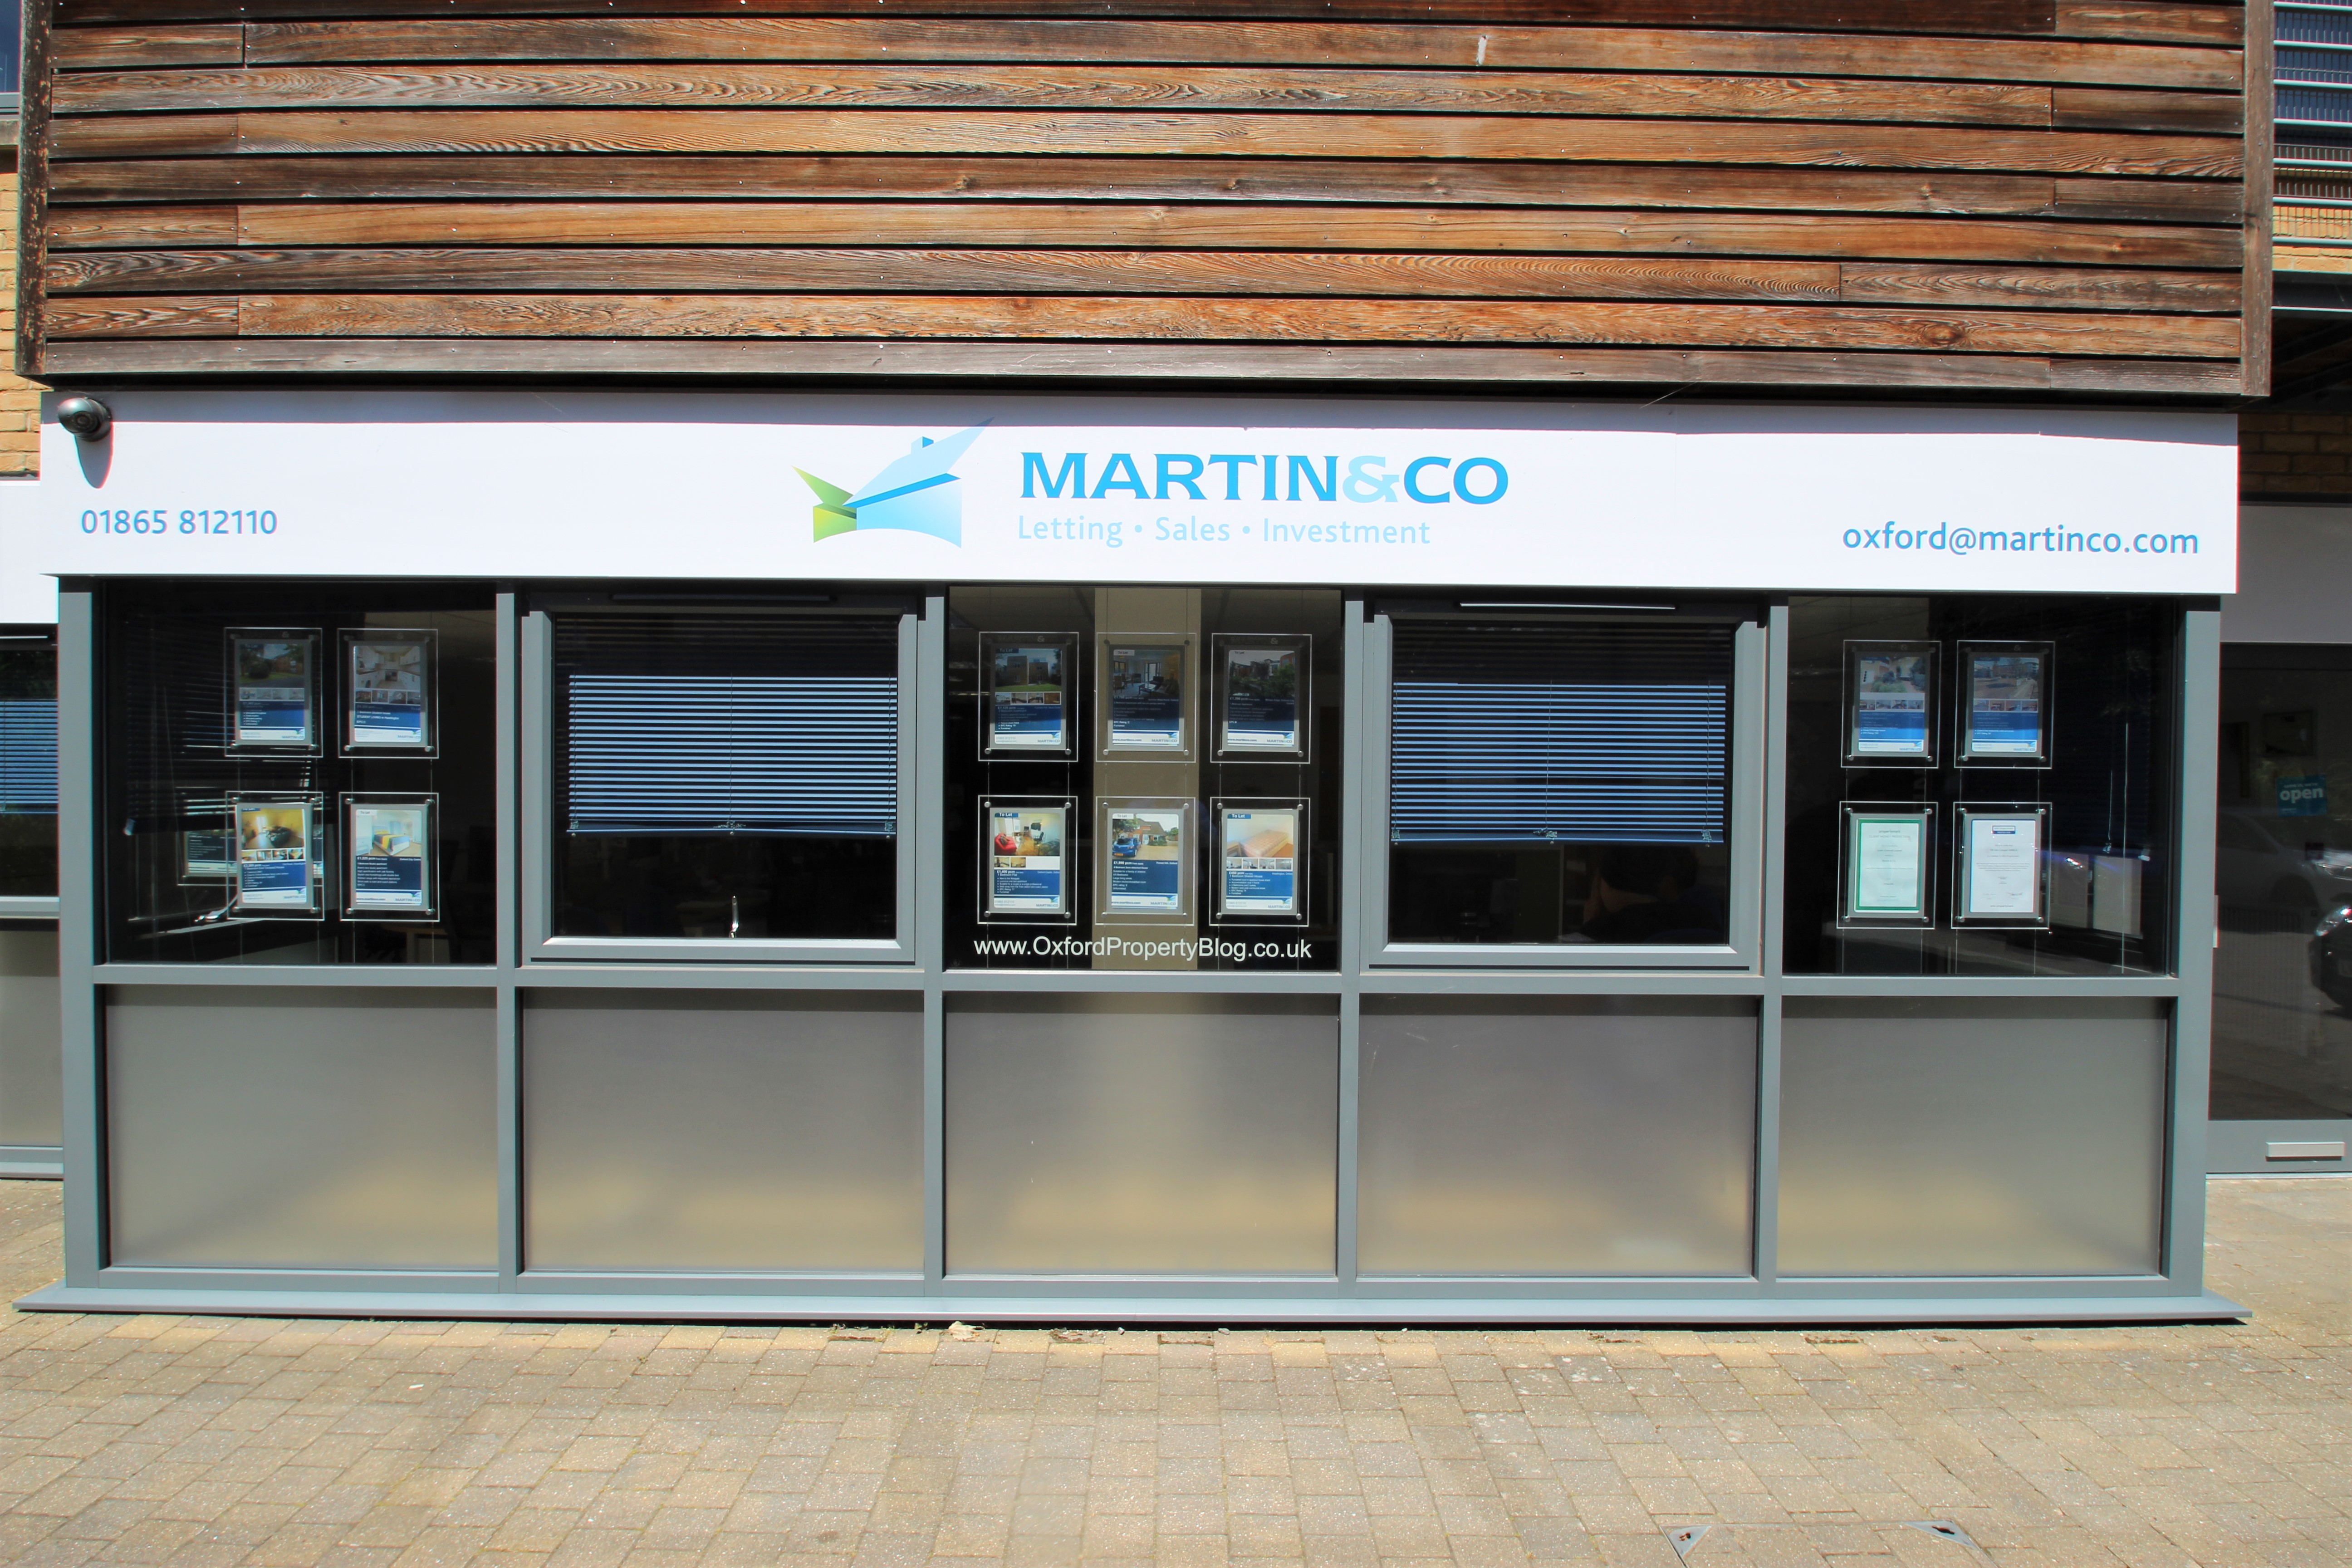 Images Martin & Co Oxford Lettings & Estate Agents